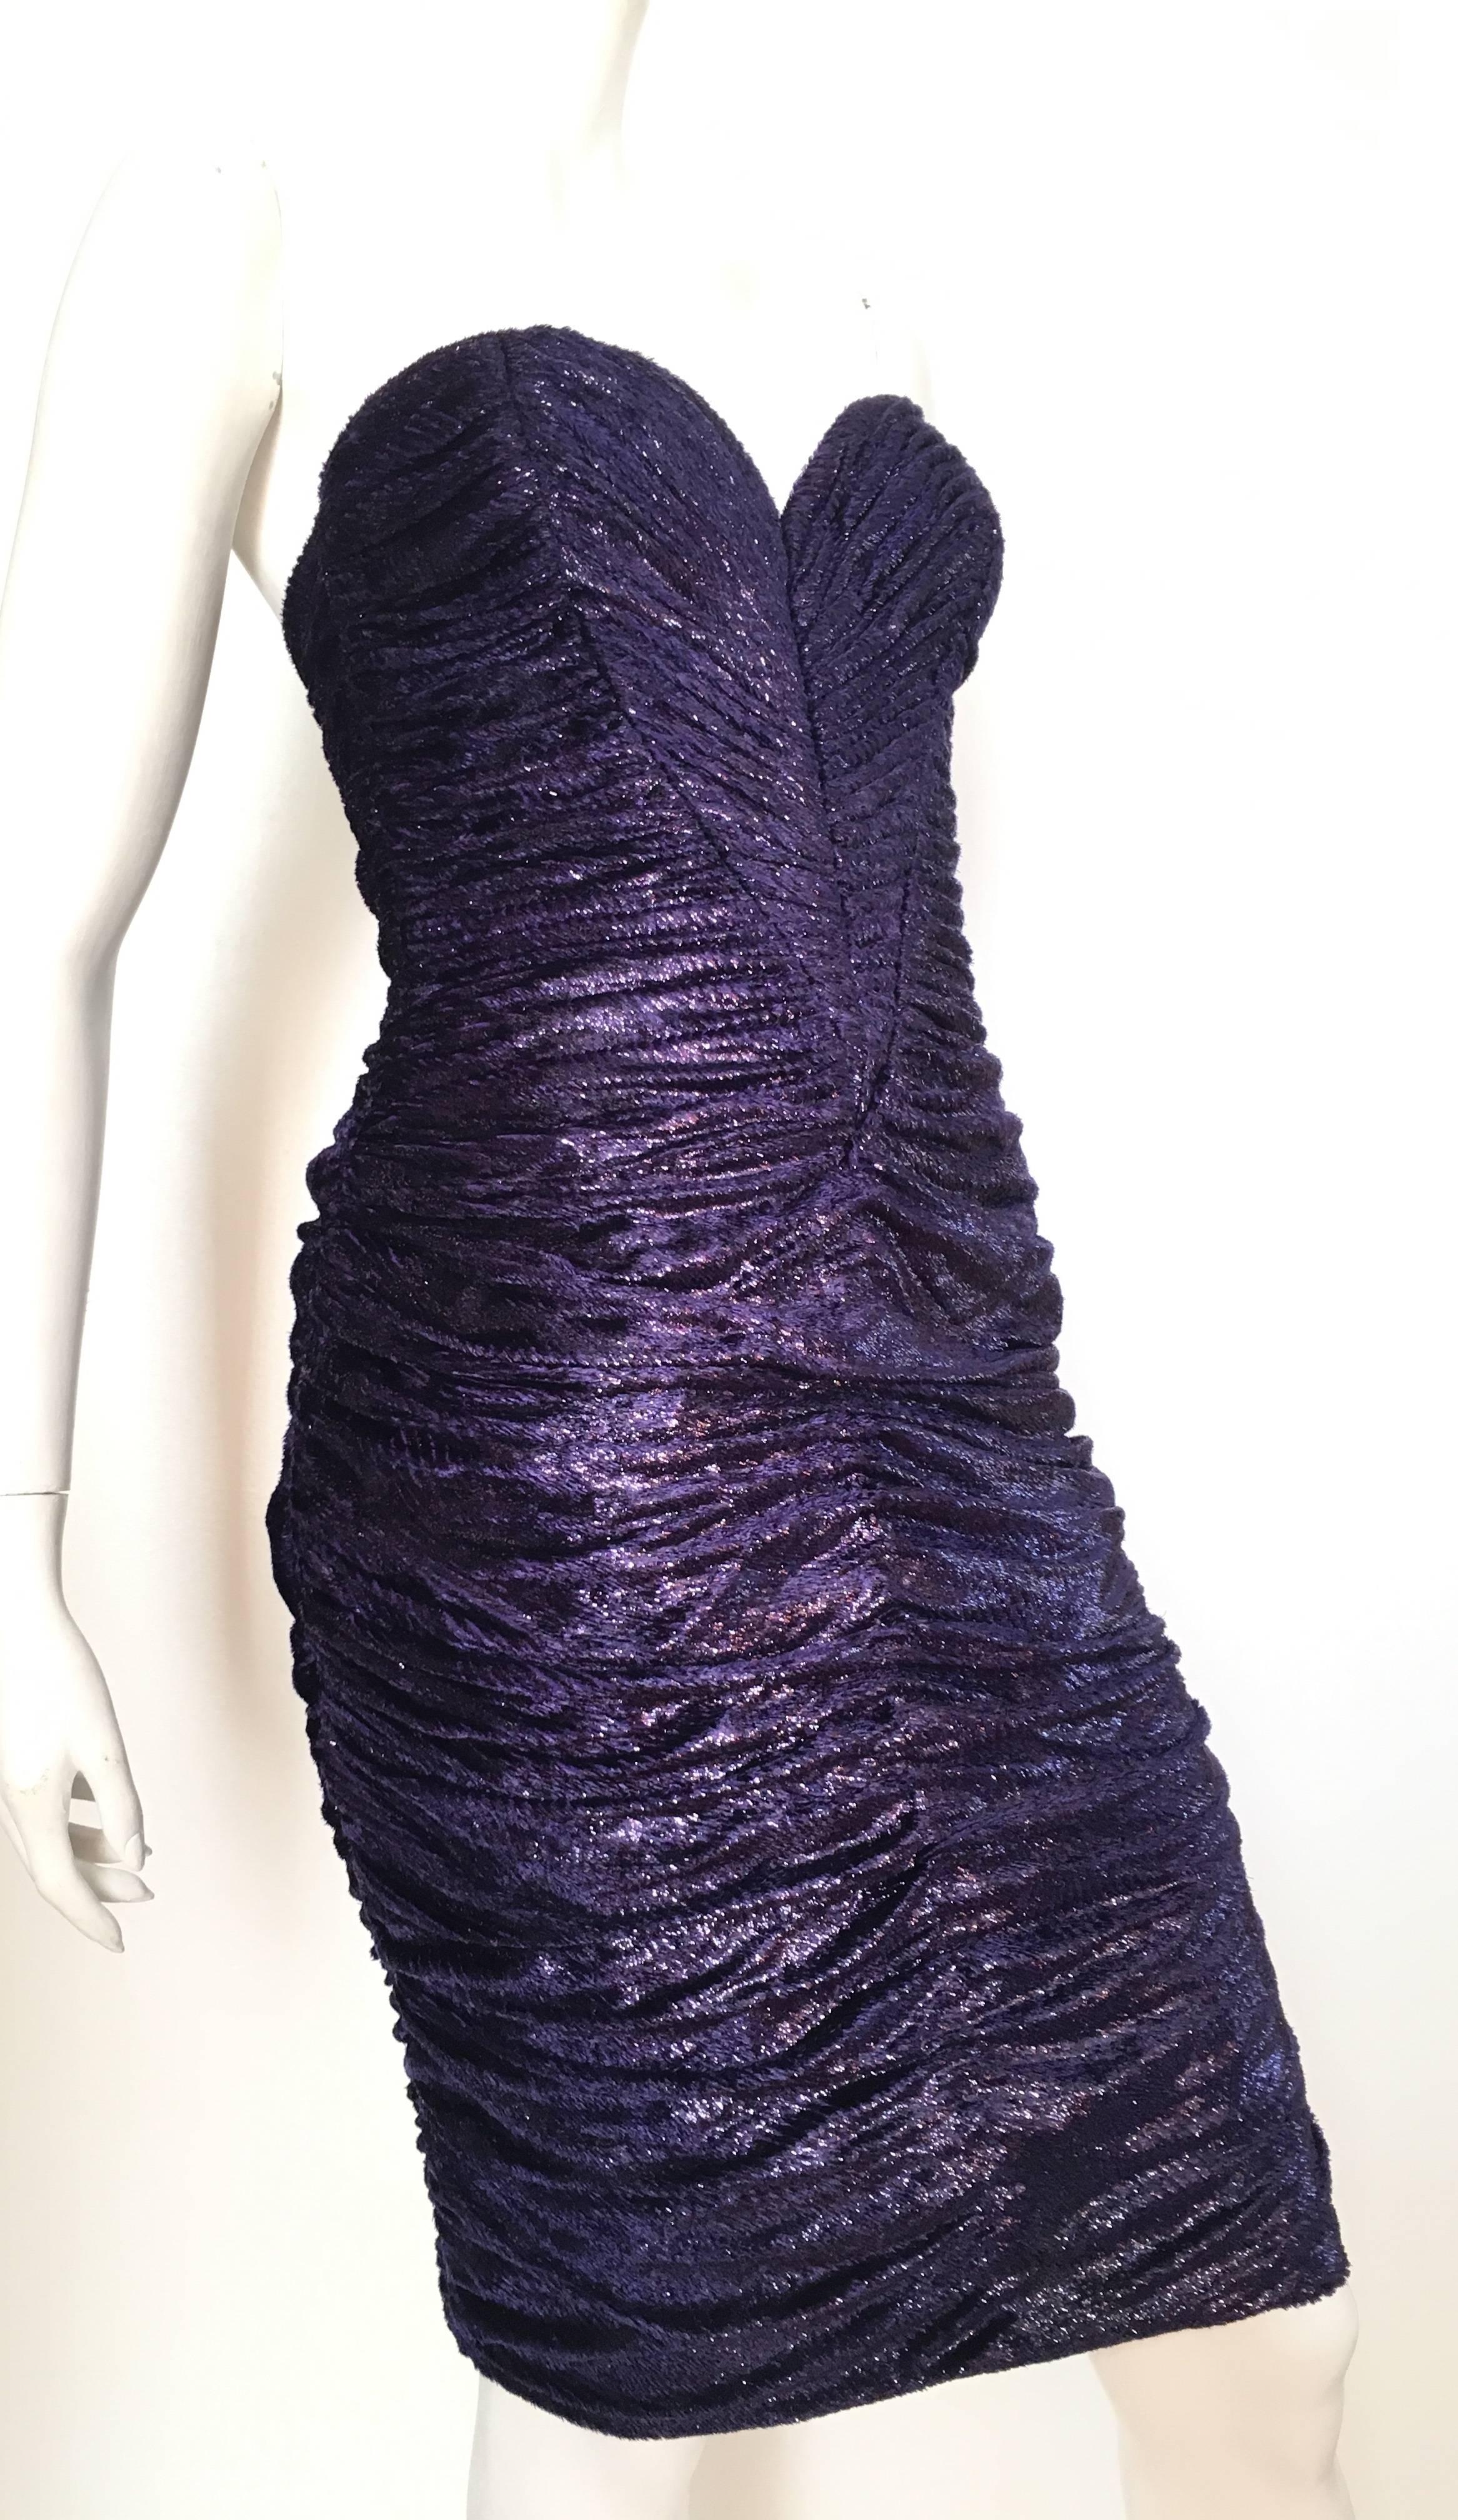 Vicky Tiel 1980s purple strapless sexy cocktail evening dress is labeled a French size 40 and fits like an USA size 4.  Ladies please grab your most trusted friend, Mr. Tape Measure, so you can properly measure your bust, waist & hips to make